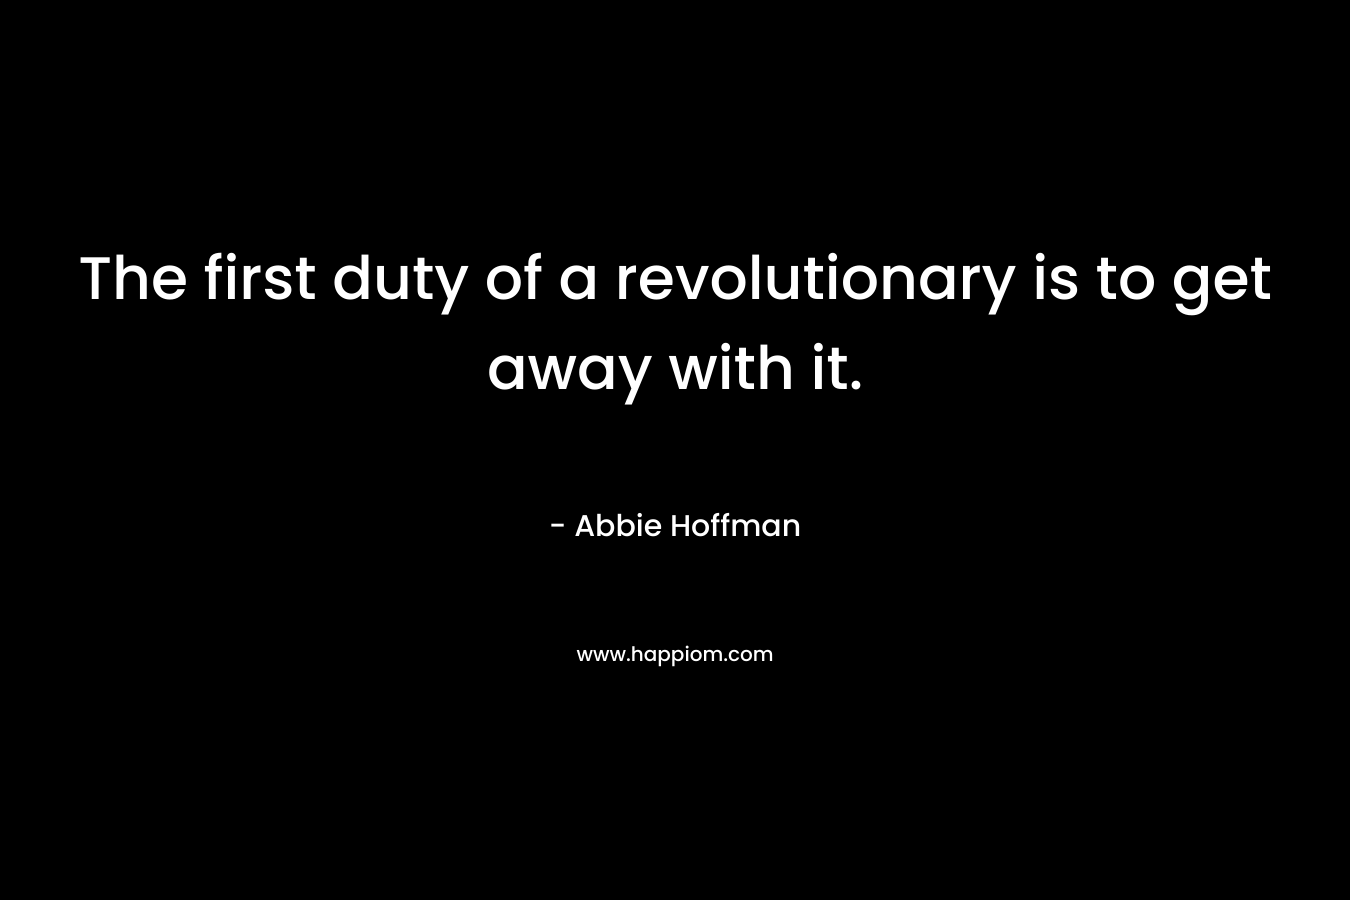 The first duty of a revolutionary is to get away with it. – Abbie Hoffman